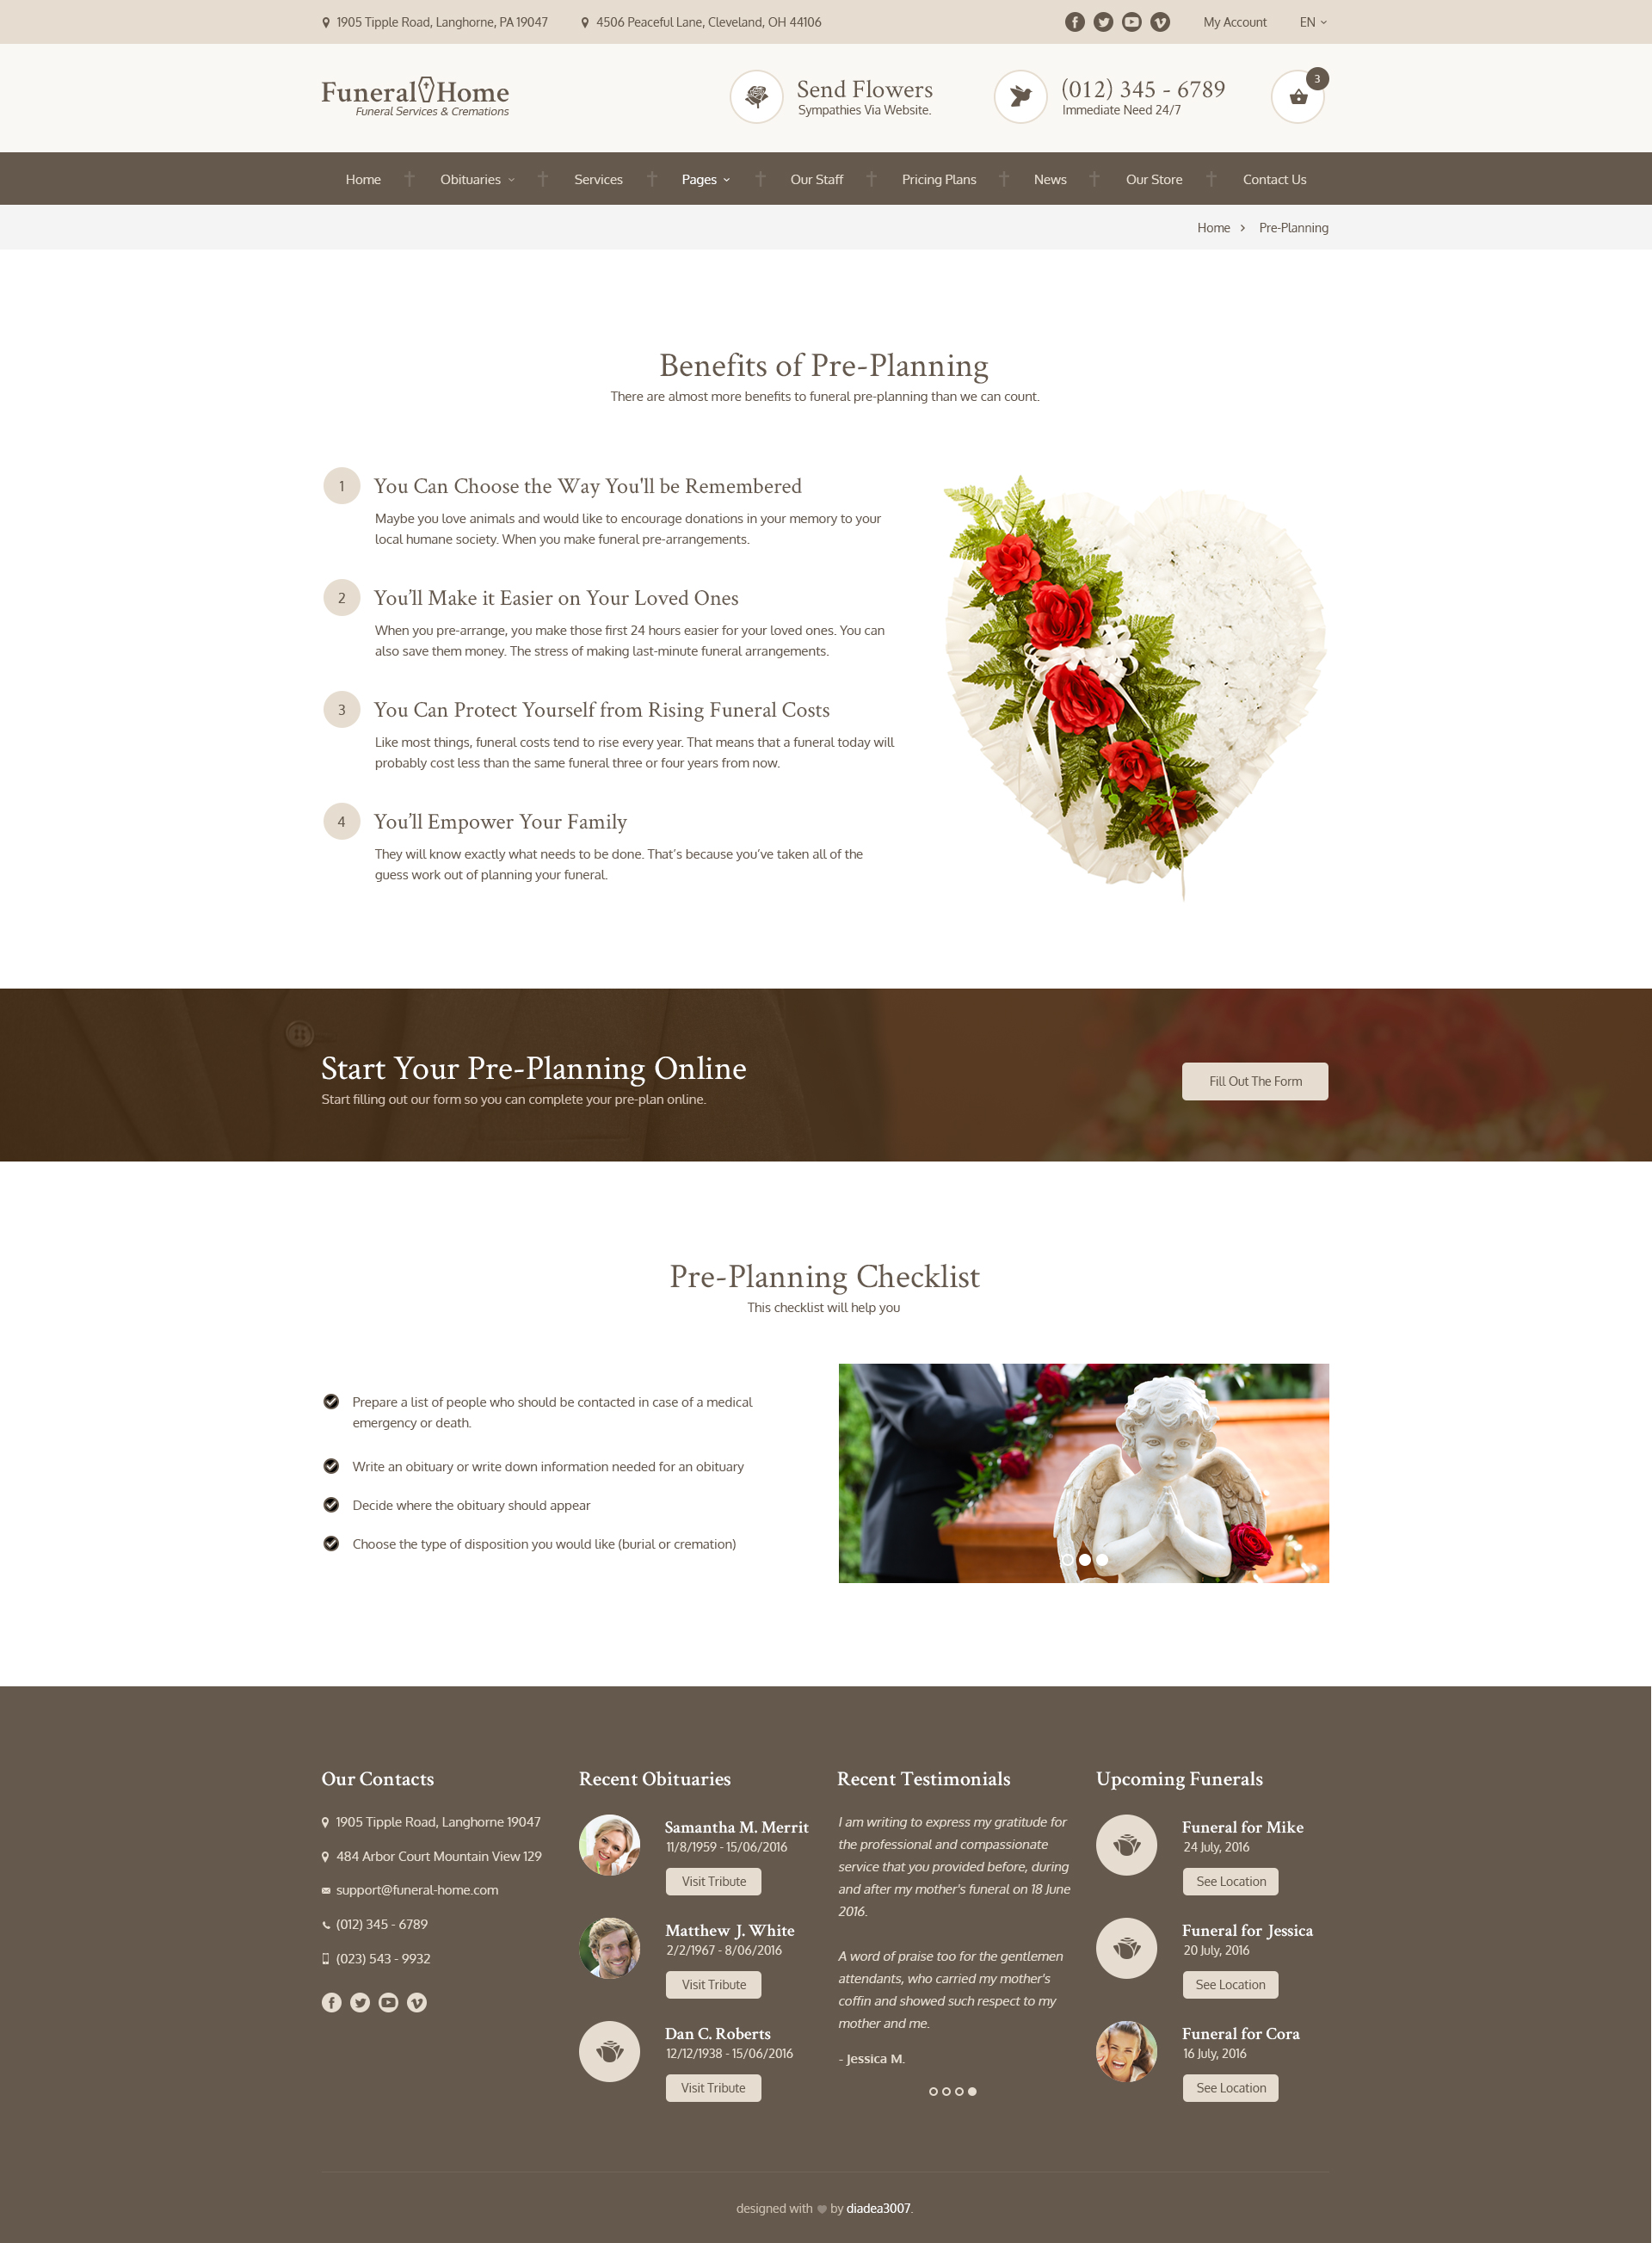 Funeral Home - Cemetery & Services PSD Template by diadea3007 | ThemeForest1920 x 2607